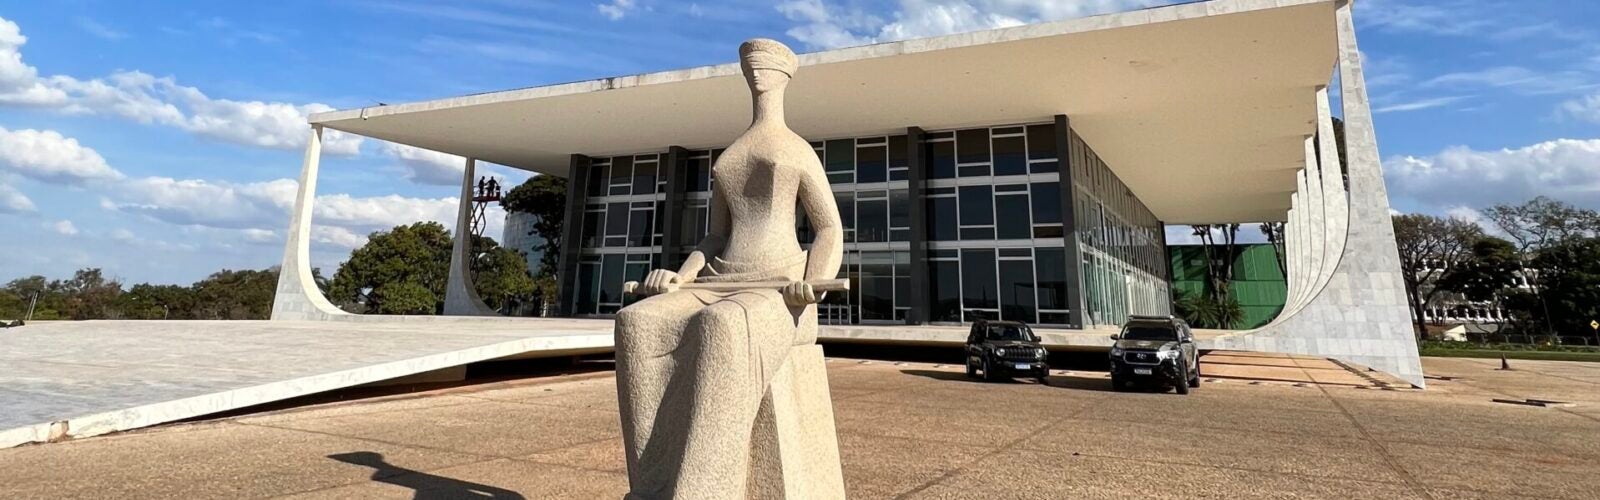 Brazil's Supreme Court Failed to Protect Prisoners from COVID-19